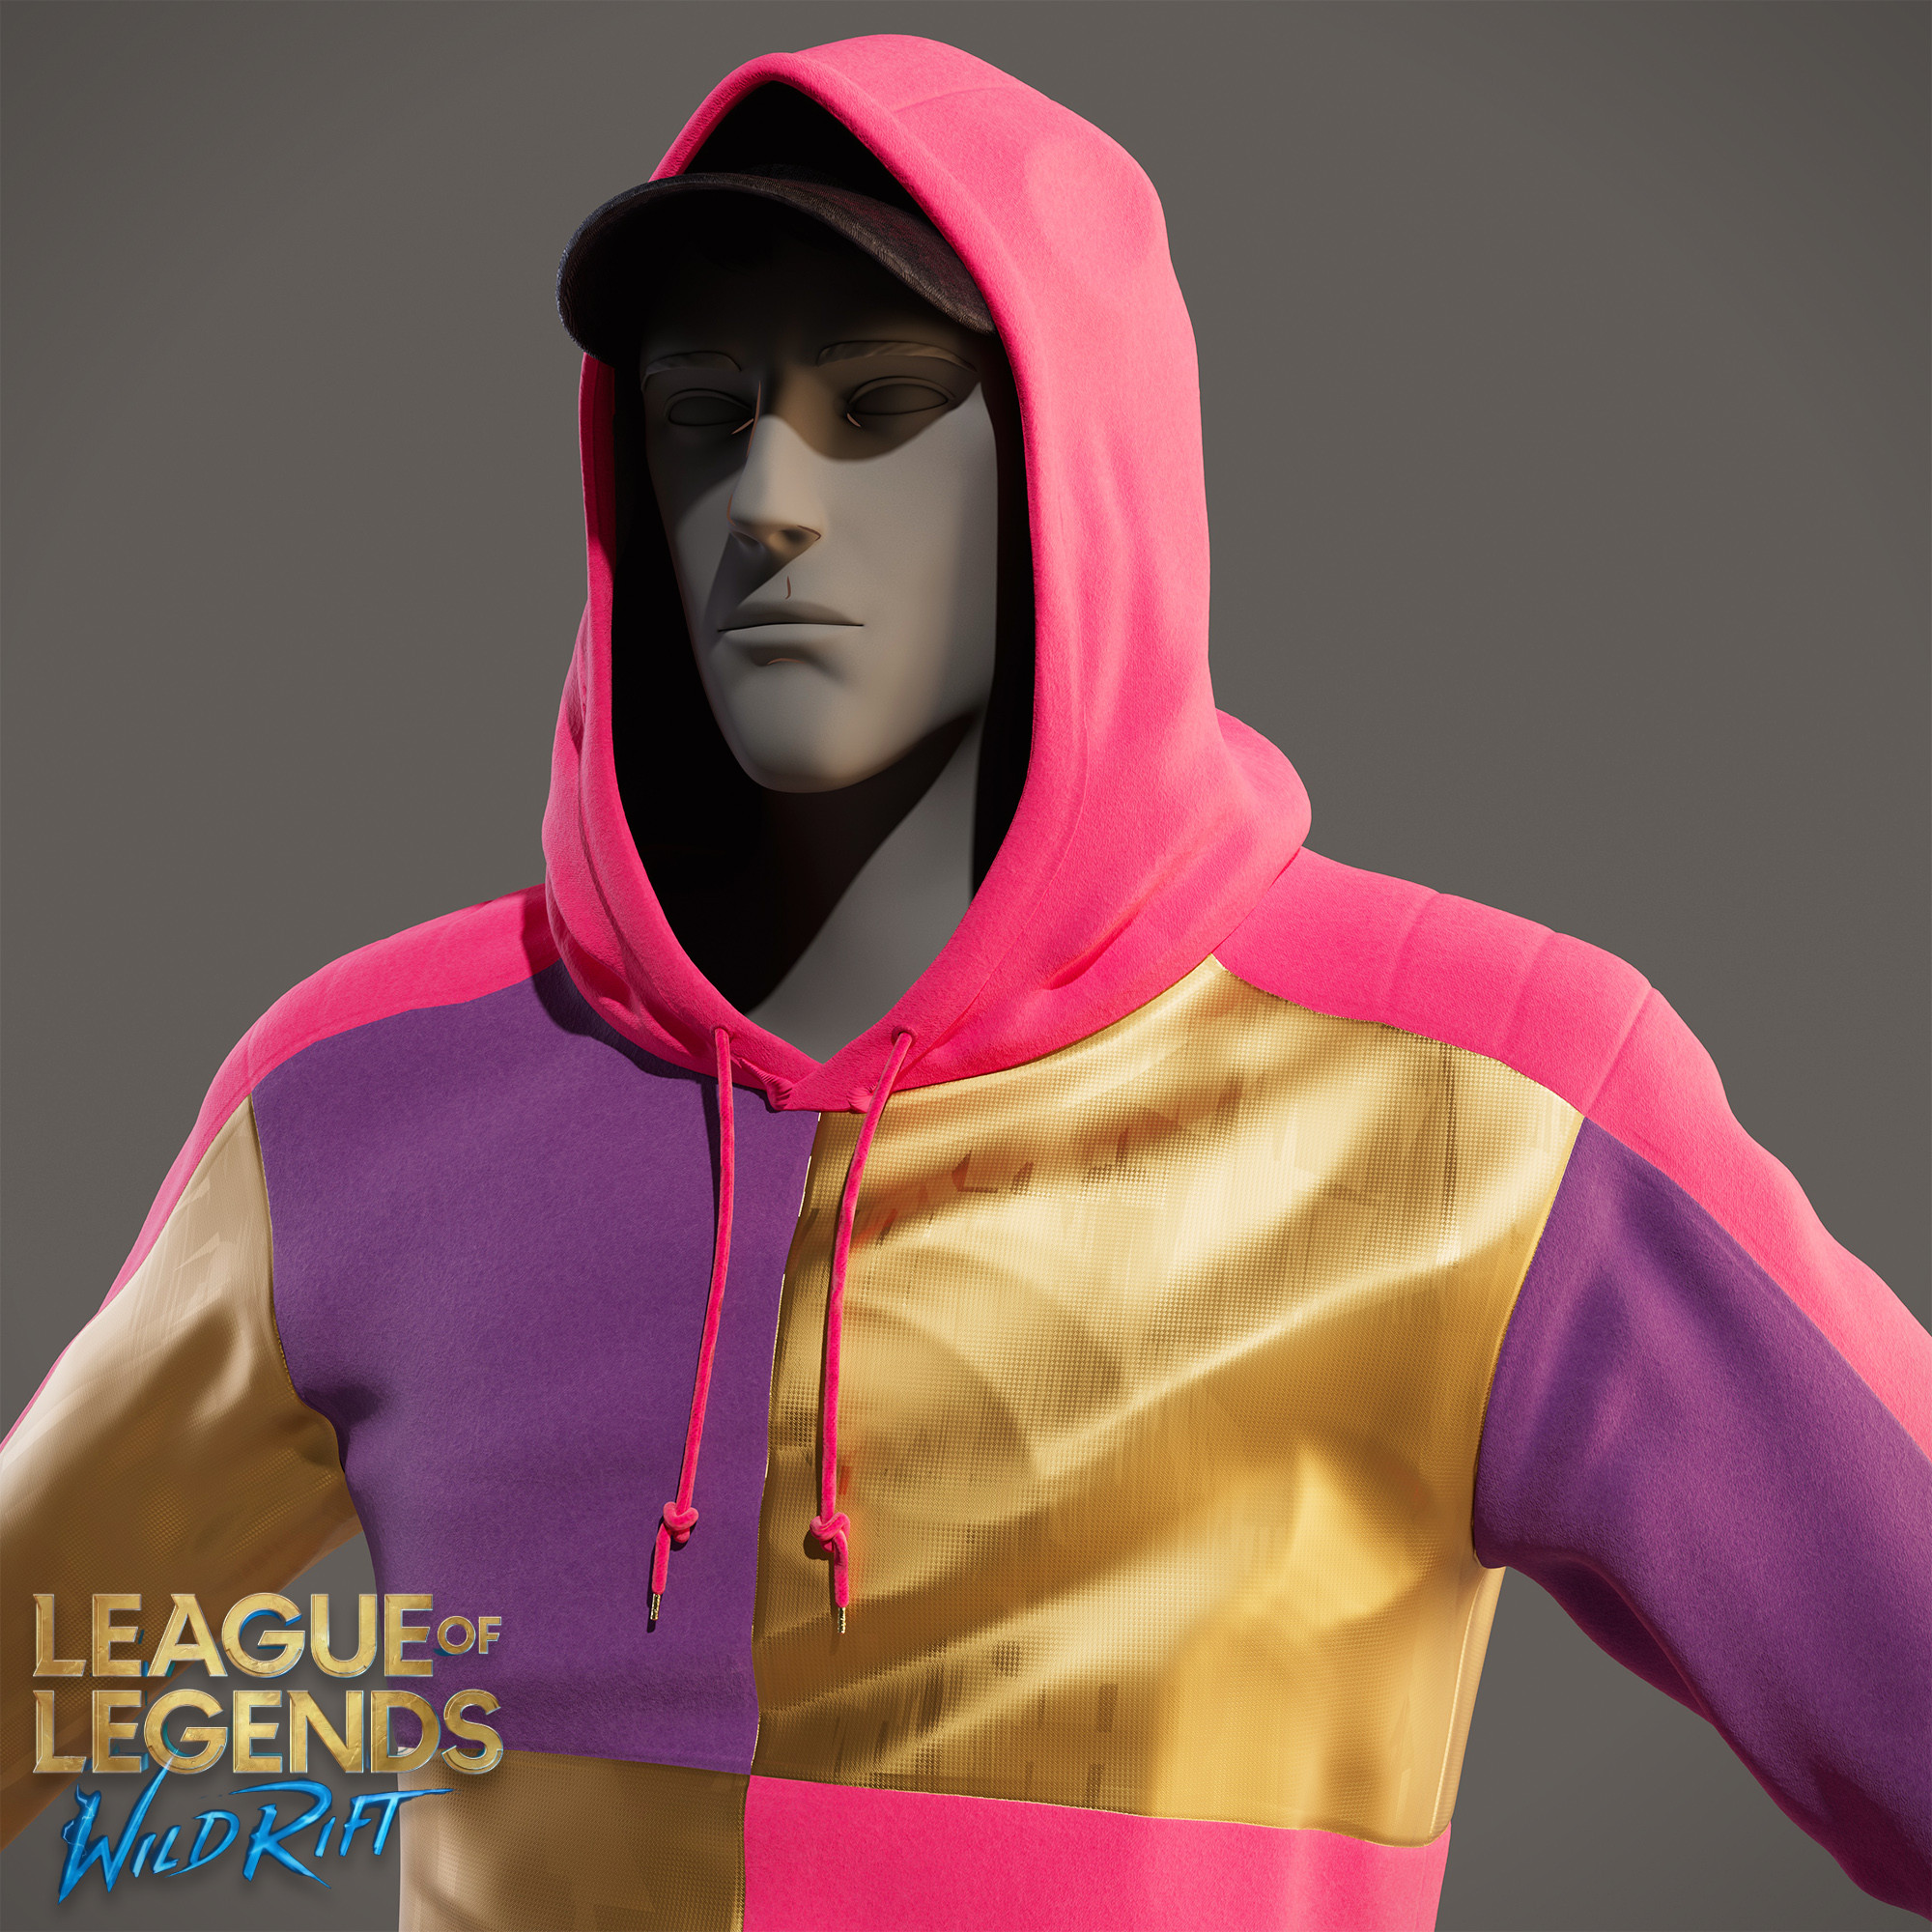 There's 3 kinds of Fabric over the hoodie. With different characteristics, bump and displacement map to give the cotton look, metallic look, etc. Over the Golden are i added some layers of patterns as everything else on this animation to connect the style